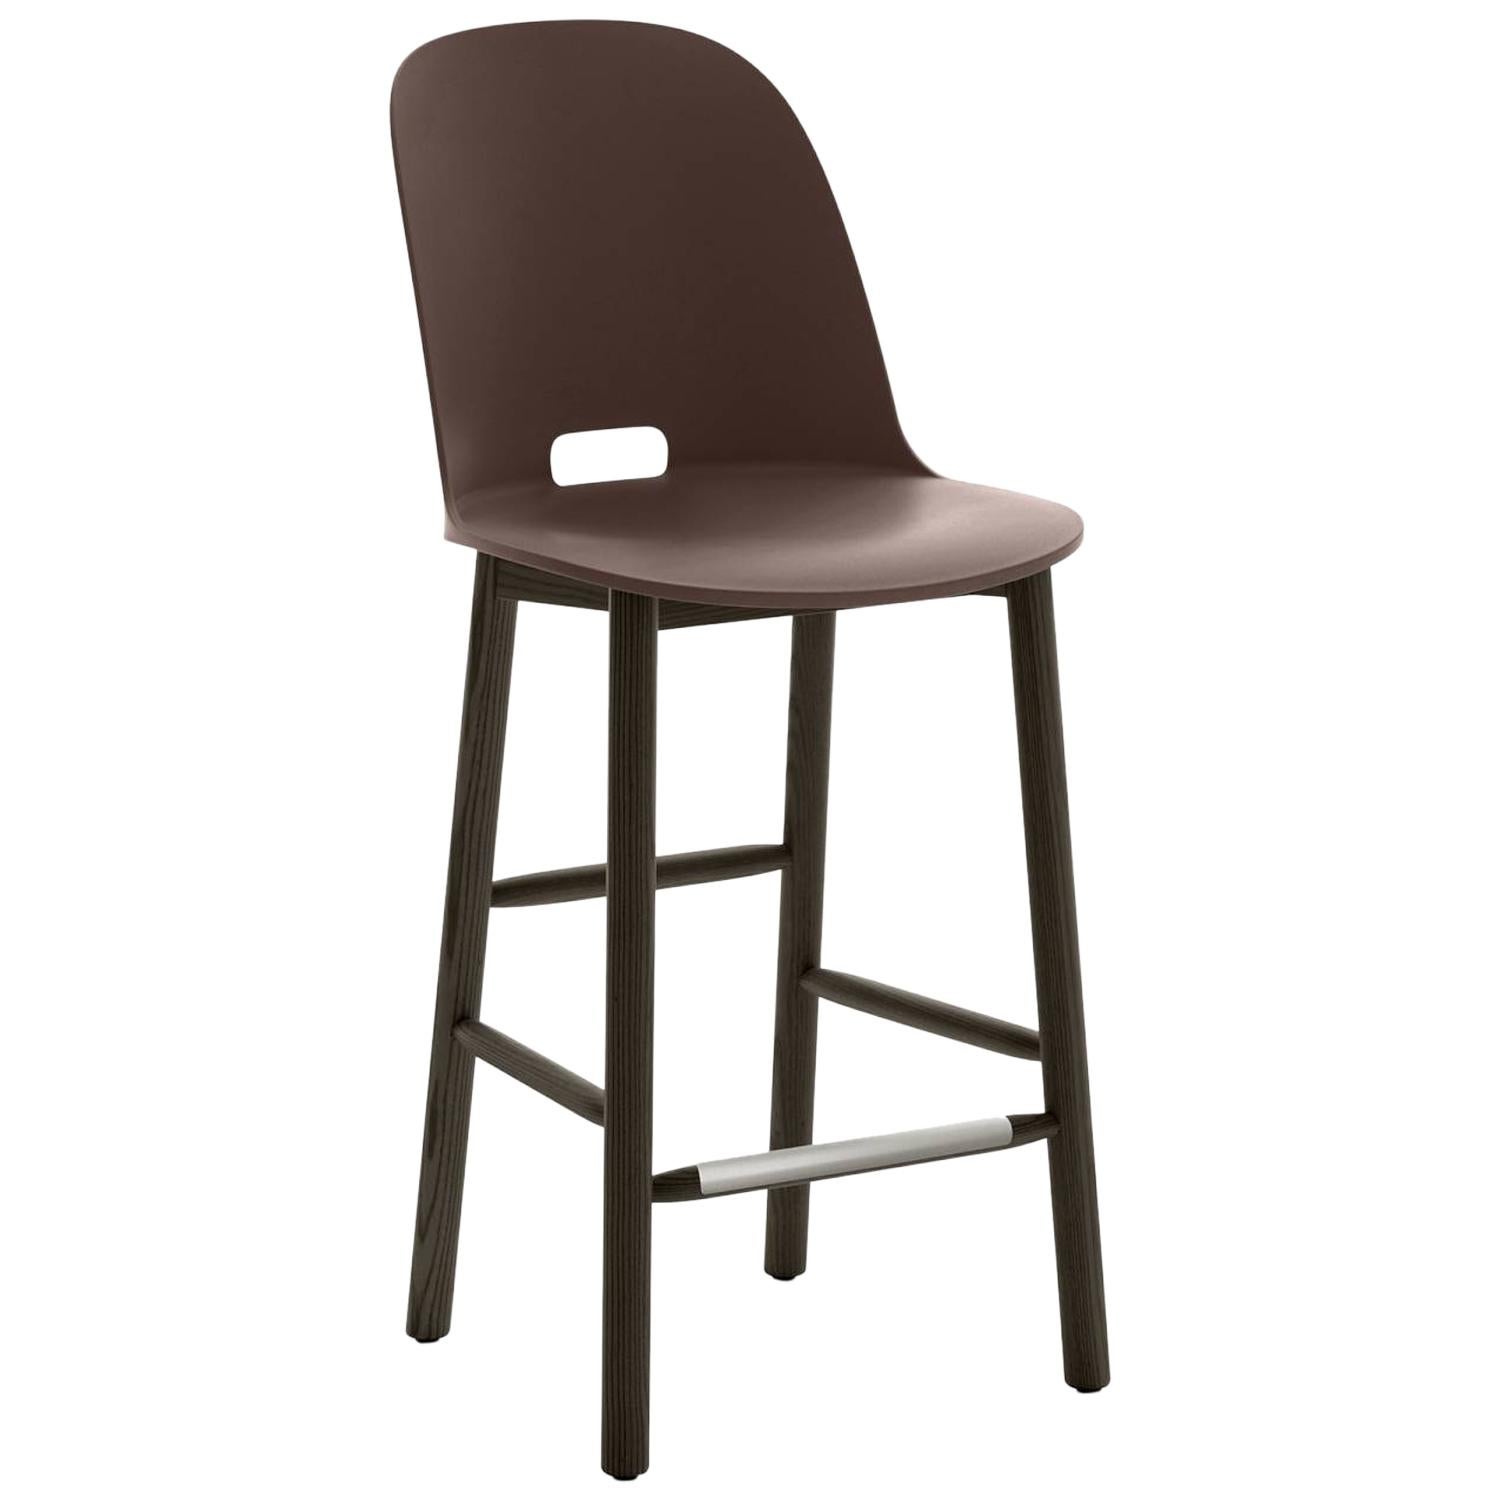 Emeco Alfi Counter Stool in Brown and Dark Ash with High Back by Jasper Morrison